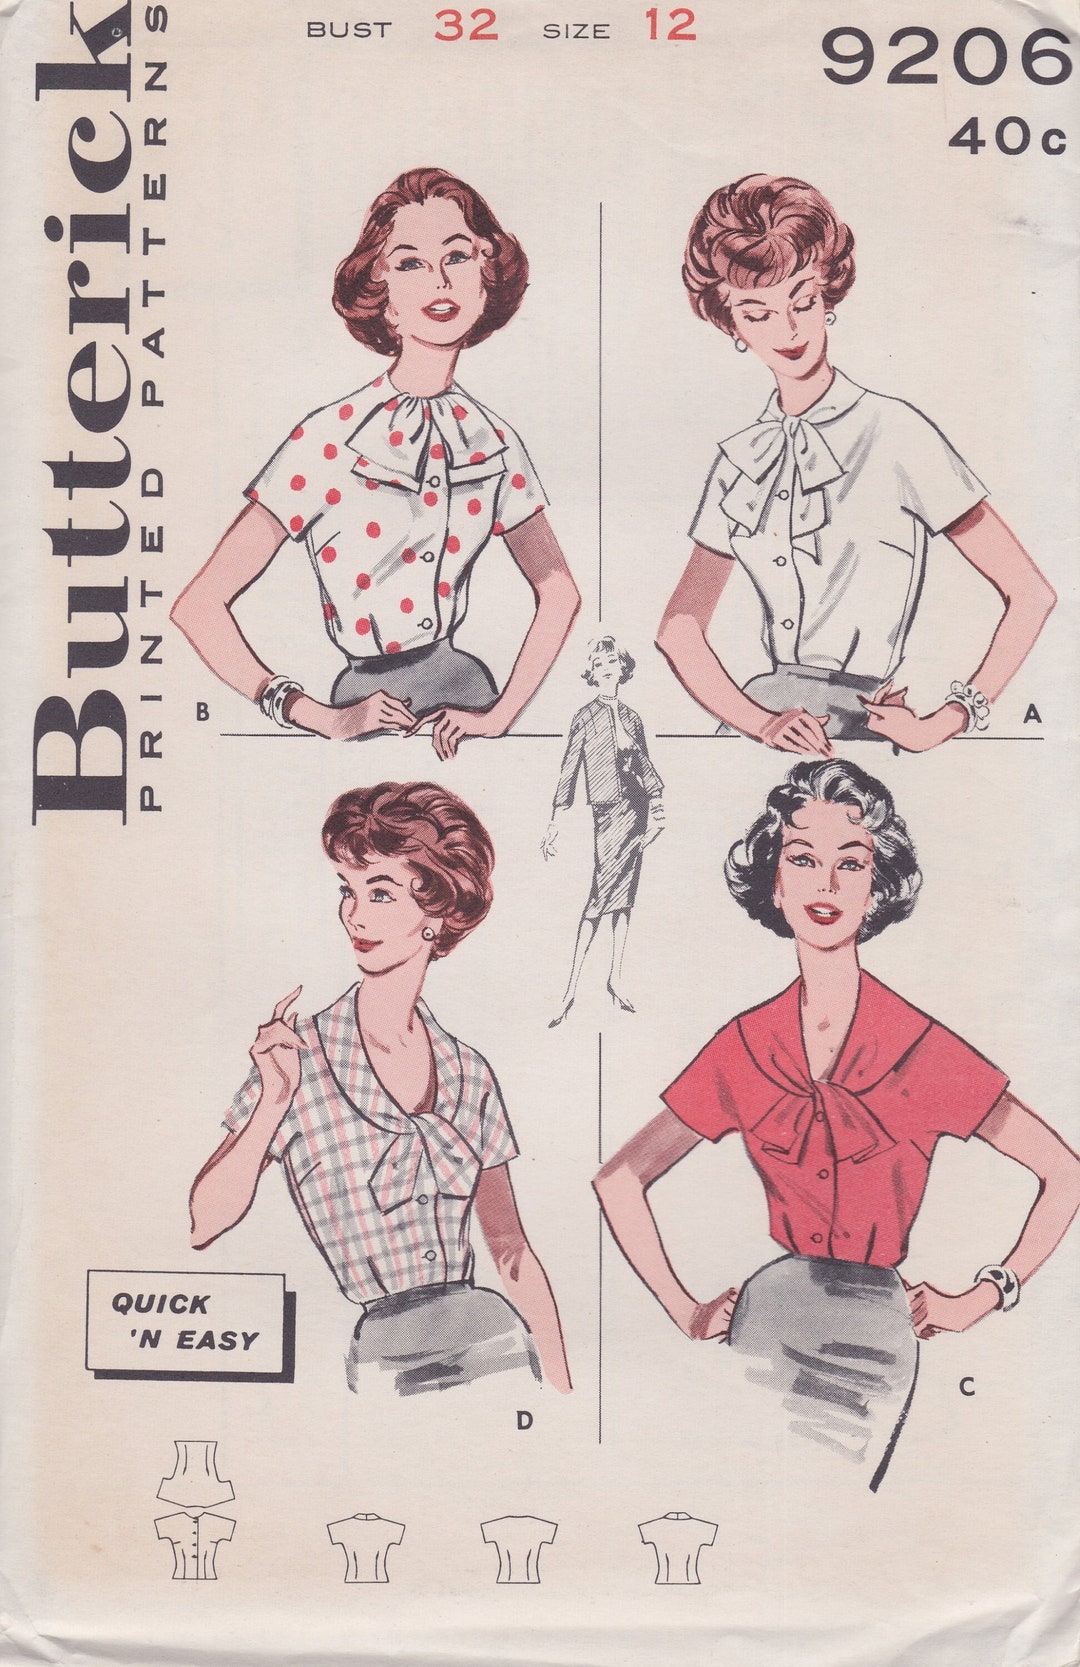 Butterick 9206 / Vintage Sewing Pattern / Blouse Shirt Top / - Etsy